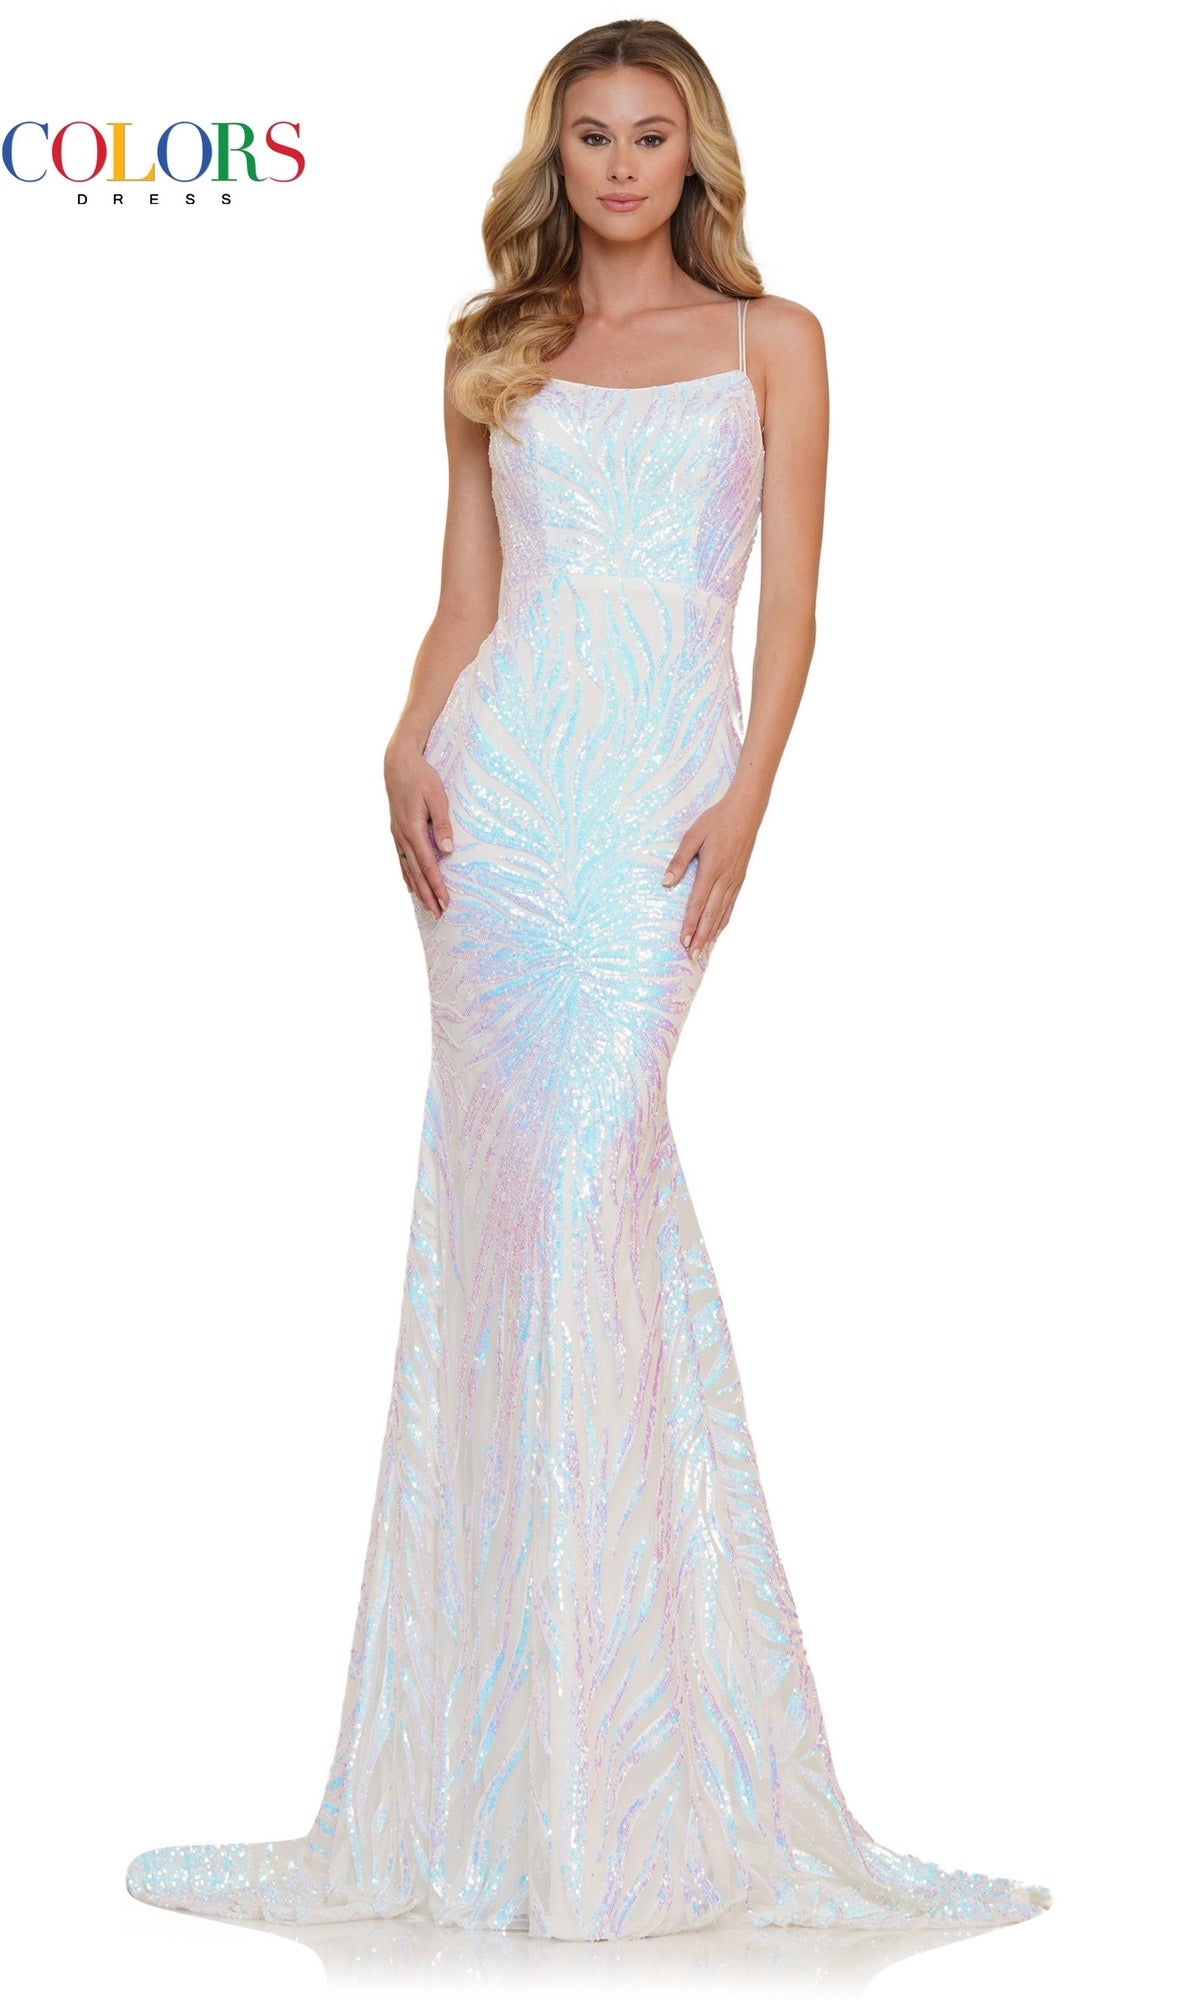 Off White Colors Dress 2743 Formal Prom Dress